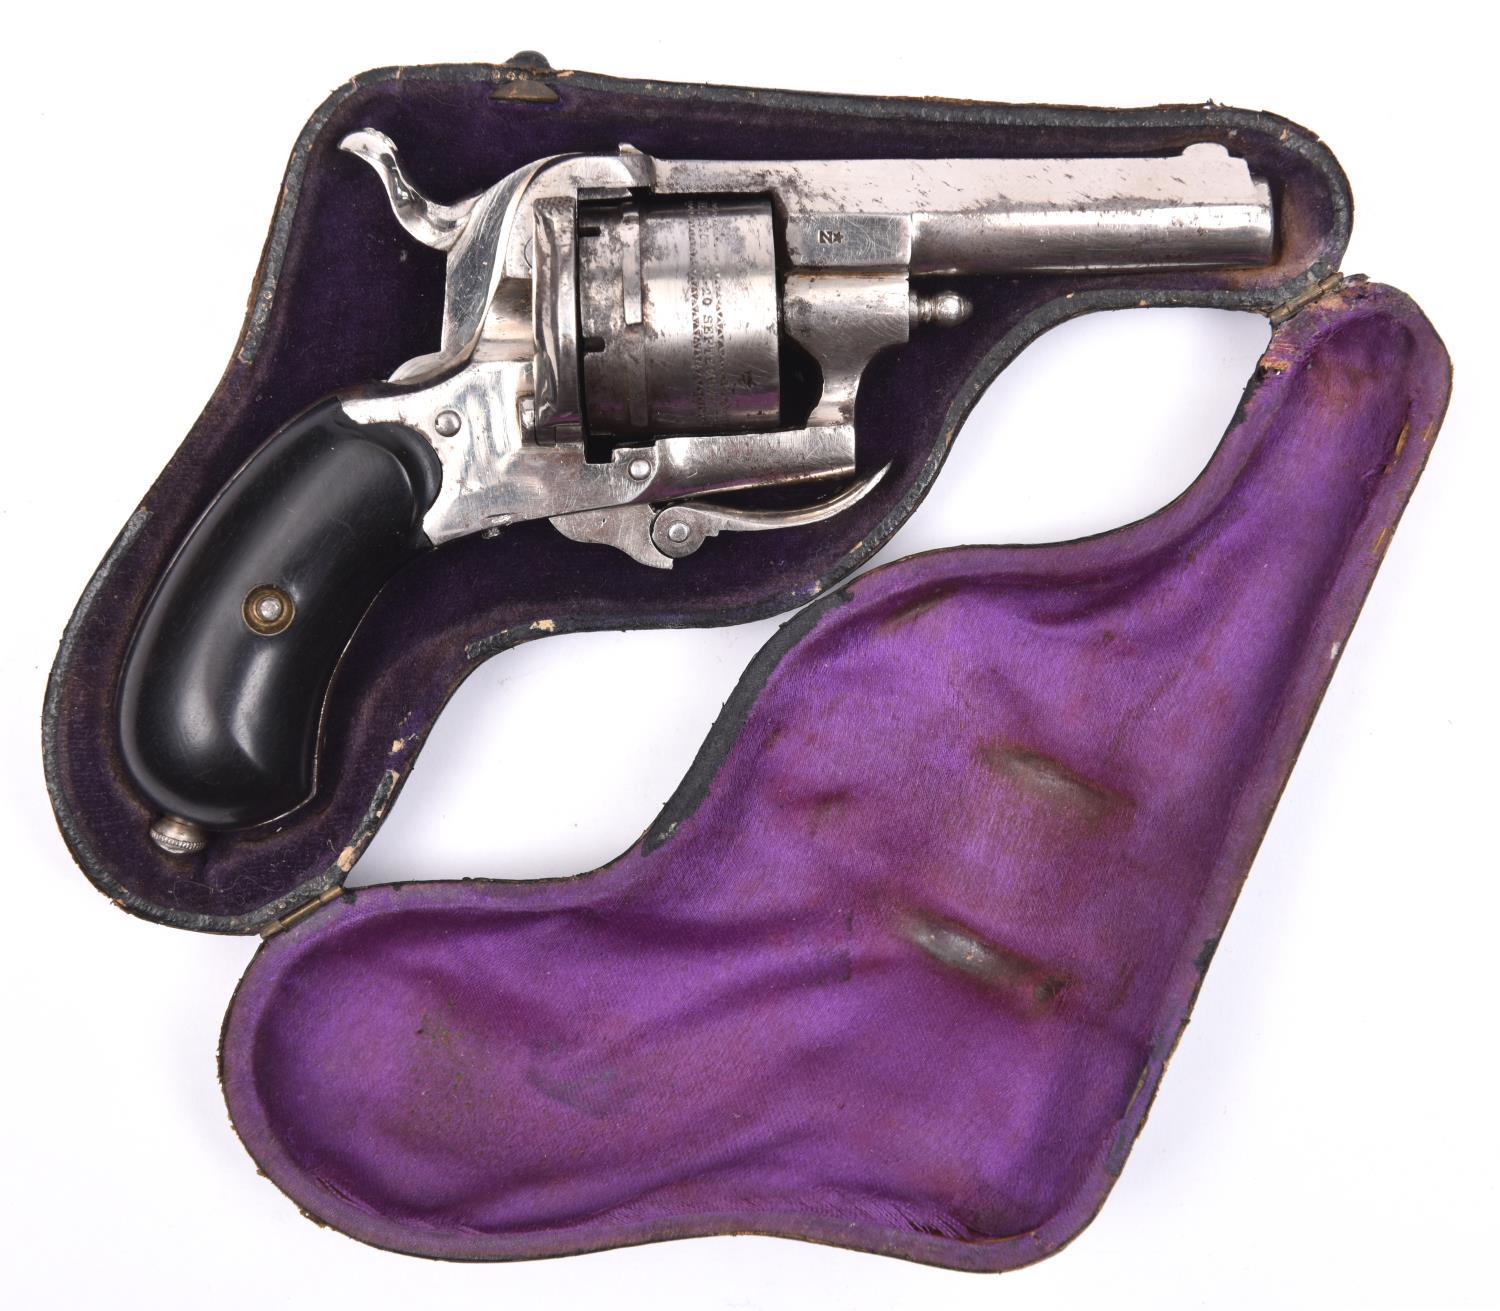 A Belgian 6 shot 7mm solid closed frame double action pinfire revolver, round barrel 2½” with